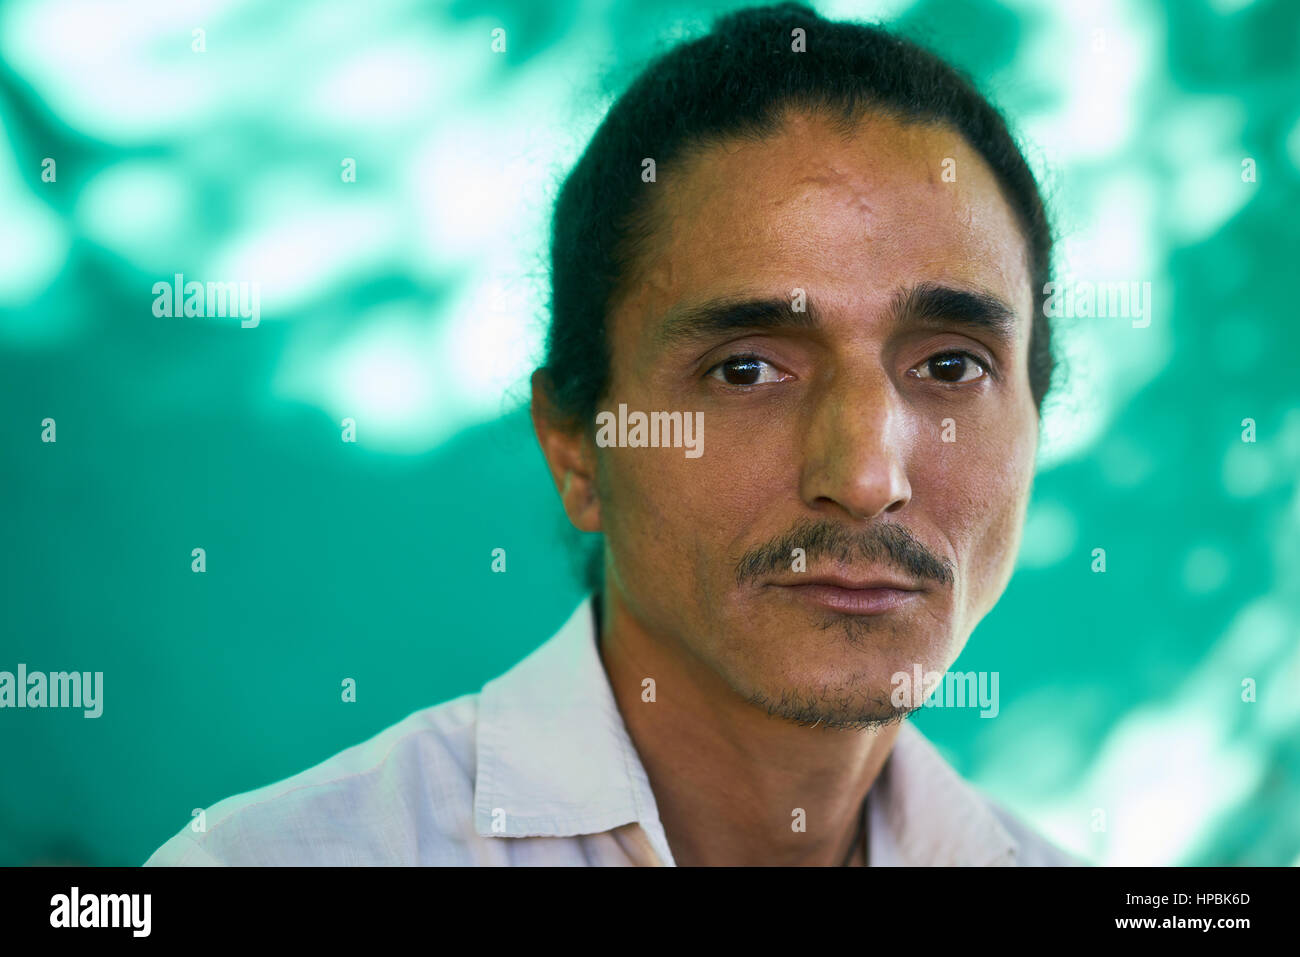 Real Cuban people and emotions, portrait of sad latino man from Havana, Cuba looking at camera with worried face and depressed expression Stock Photo